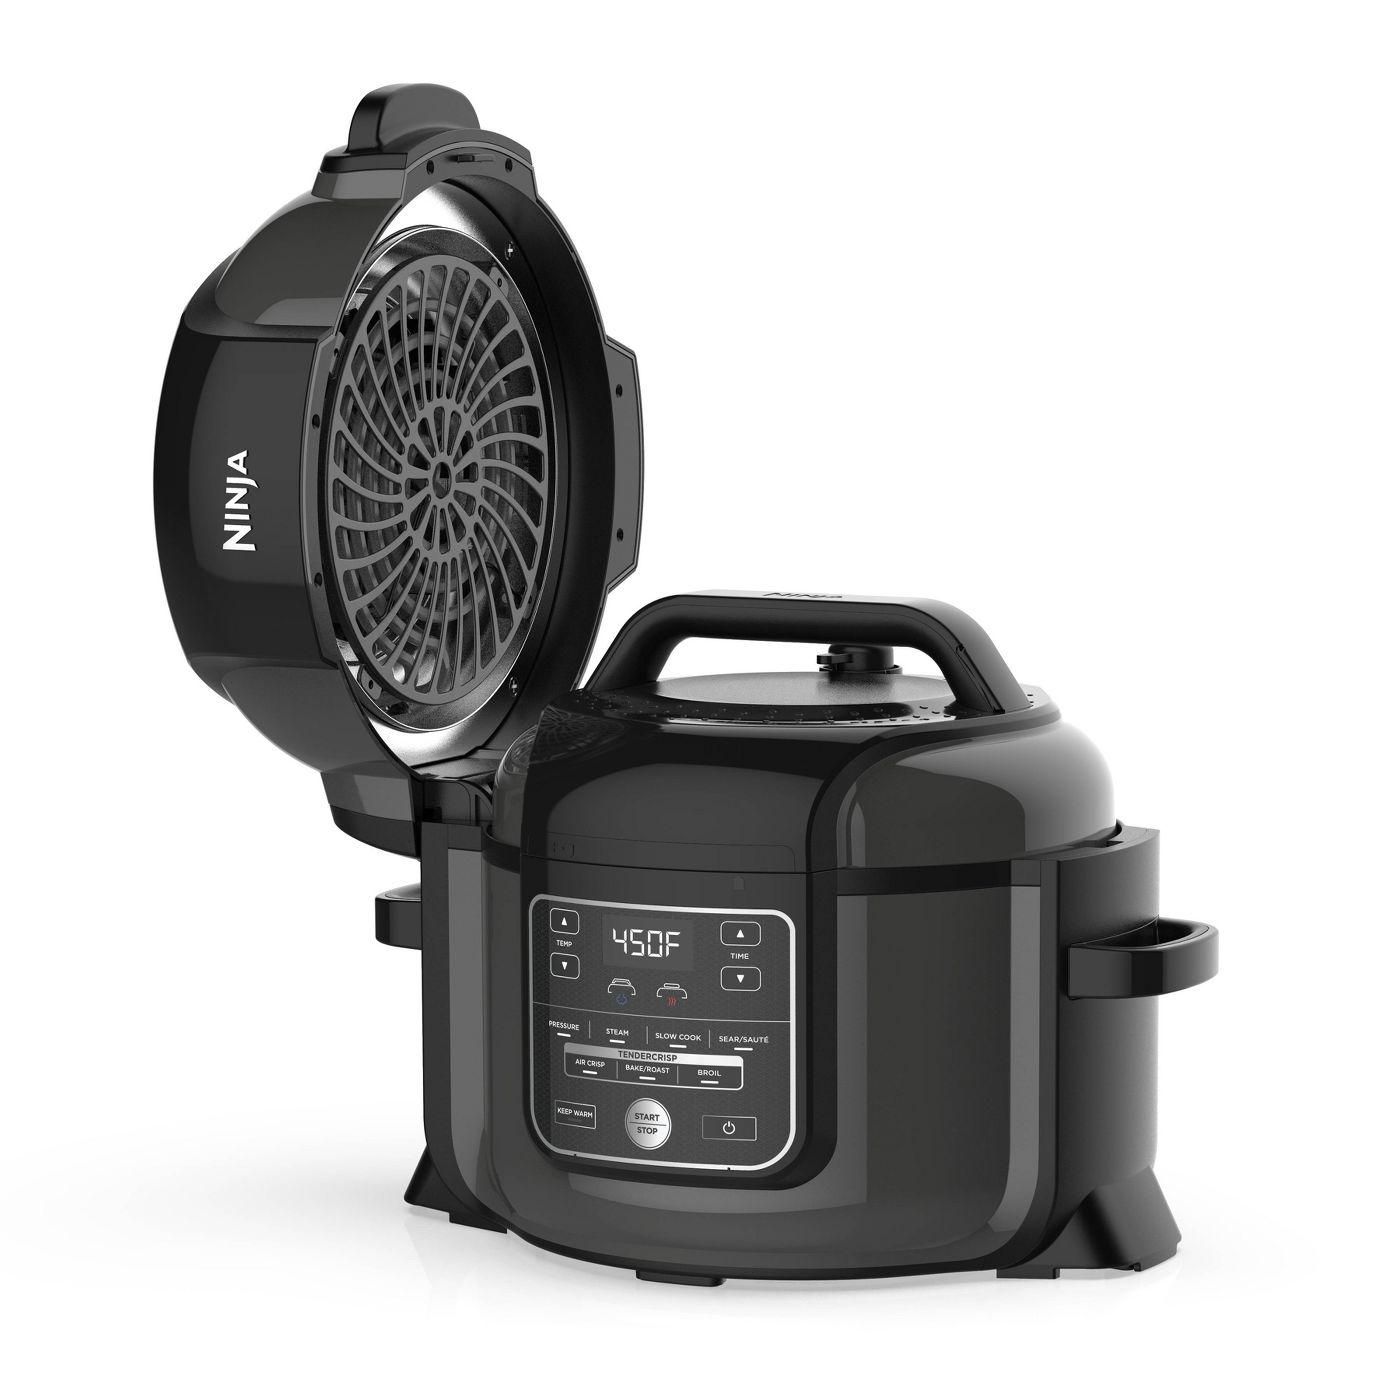 9-in-1 Pressure Cooker and Air Fryer from Ninja